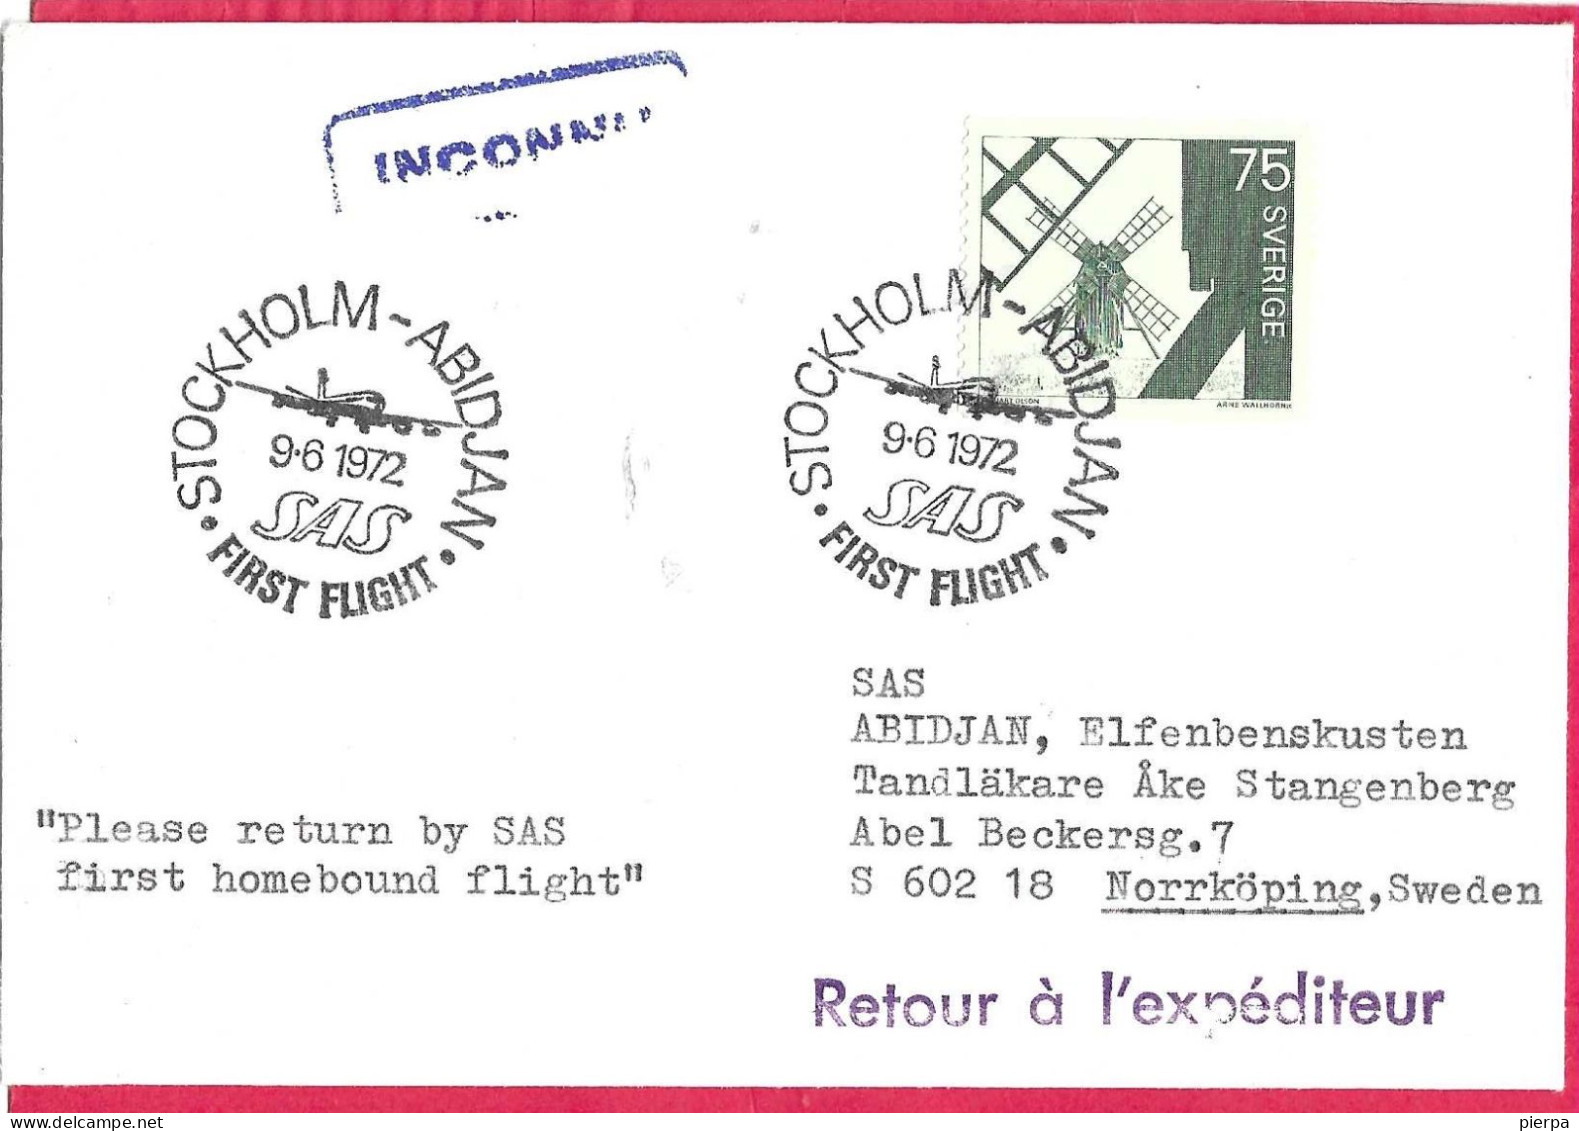 SVERIGE - FIRST FLIGHT SAS FROM STOCKHOLM TO ABIDJAN *9.6.1972* ON OFFICIAL COVER - Covers & Documents